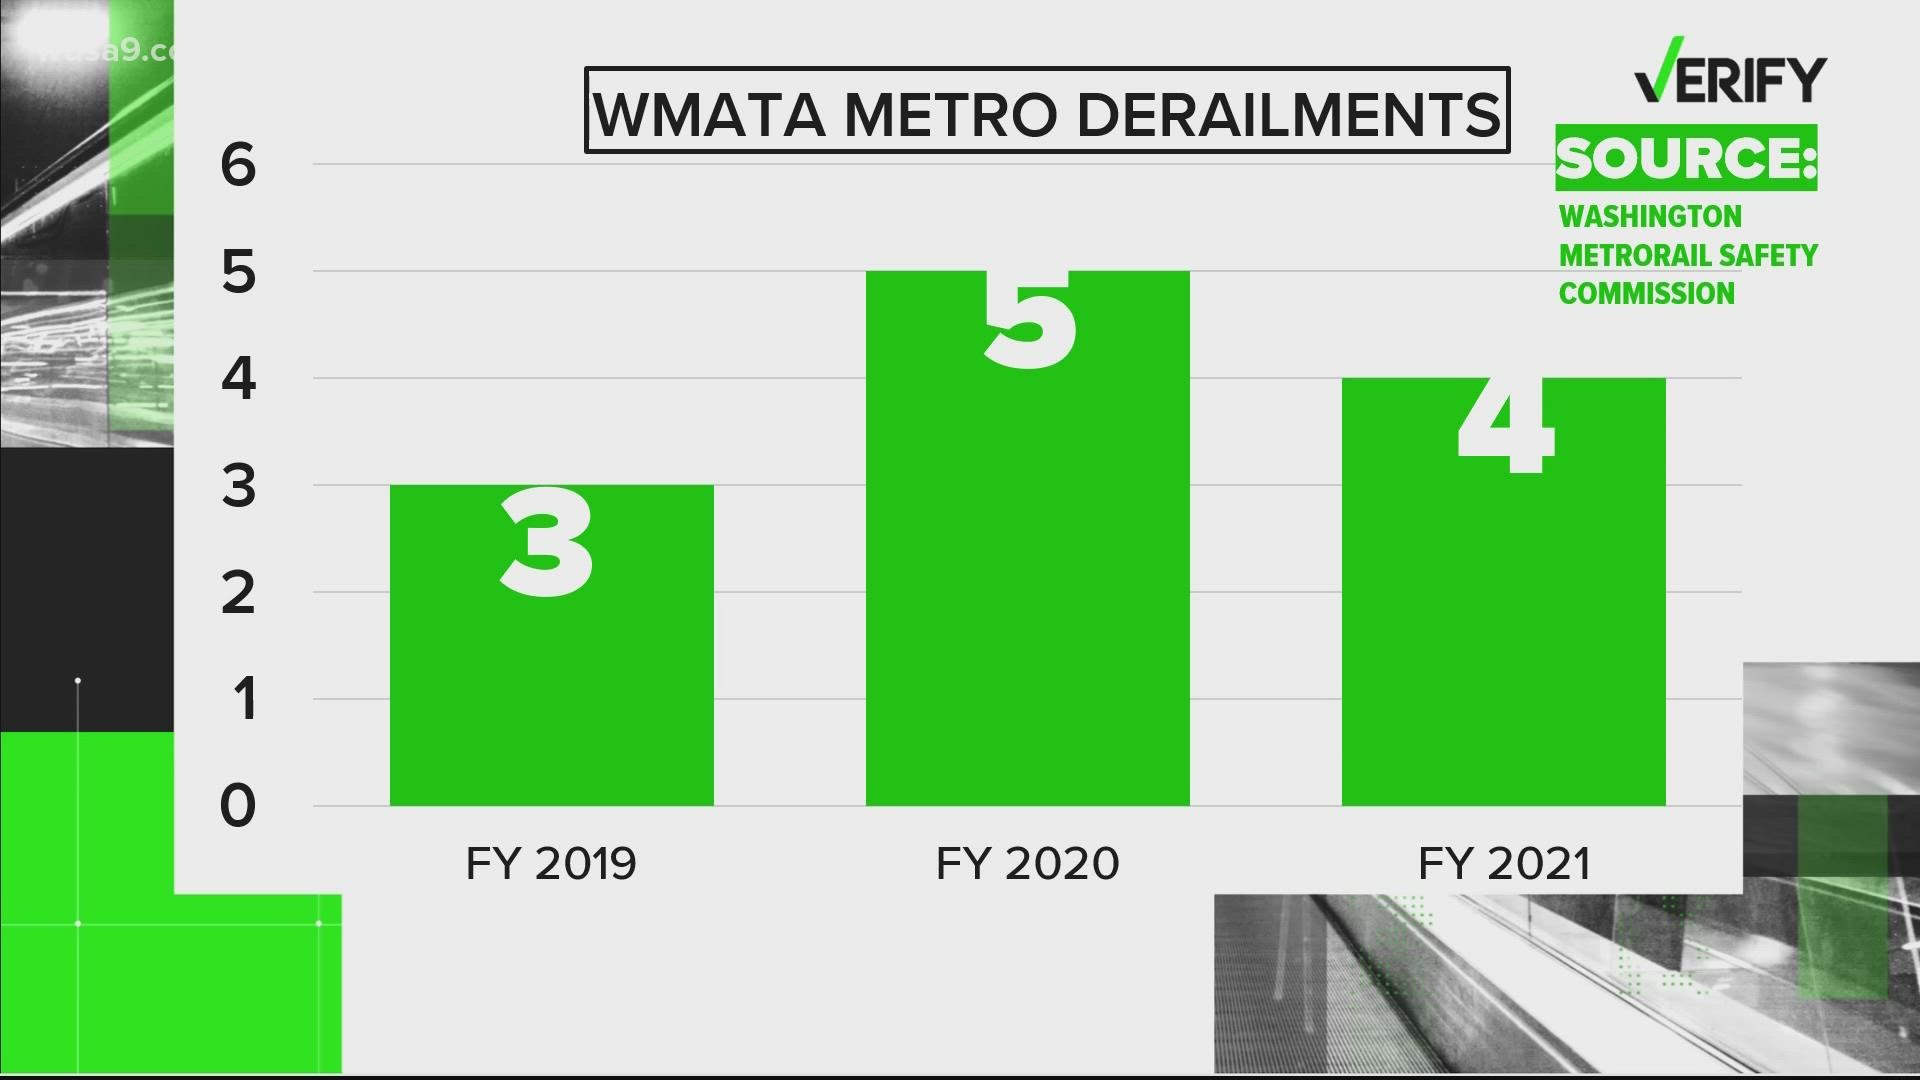 Over the past three years, WMATA reported a dozen derailments and no injuries were reported.